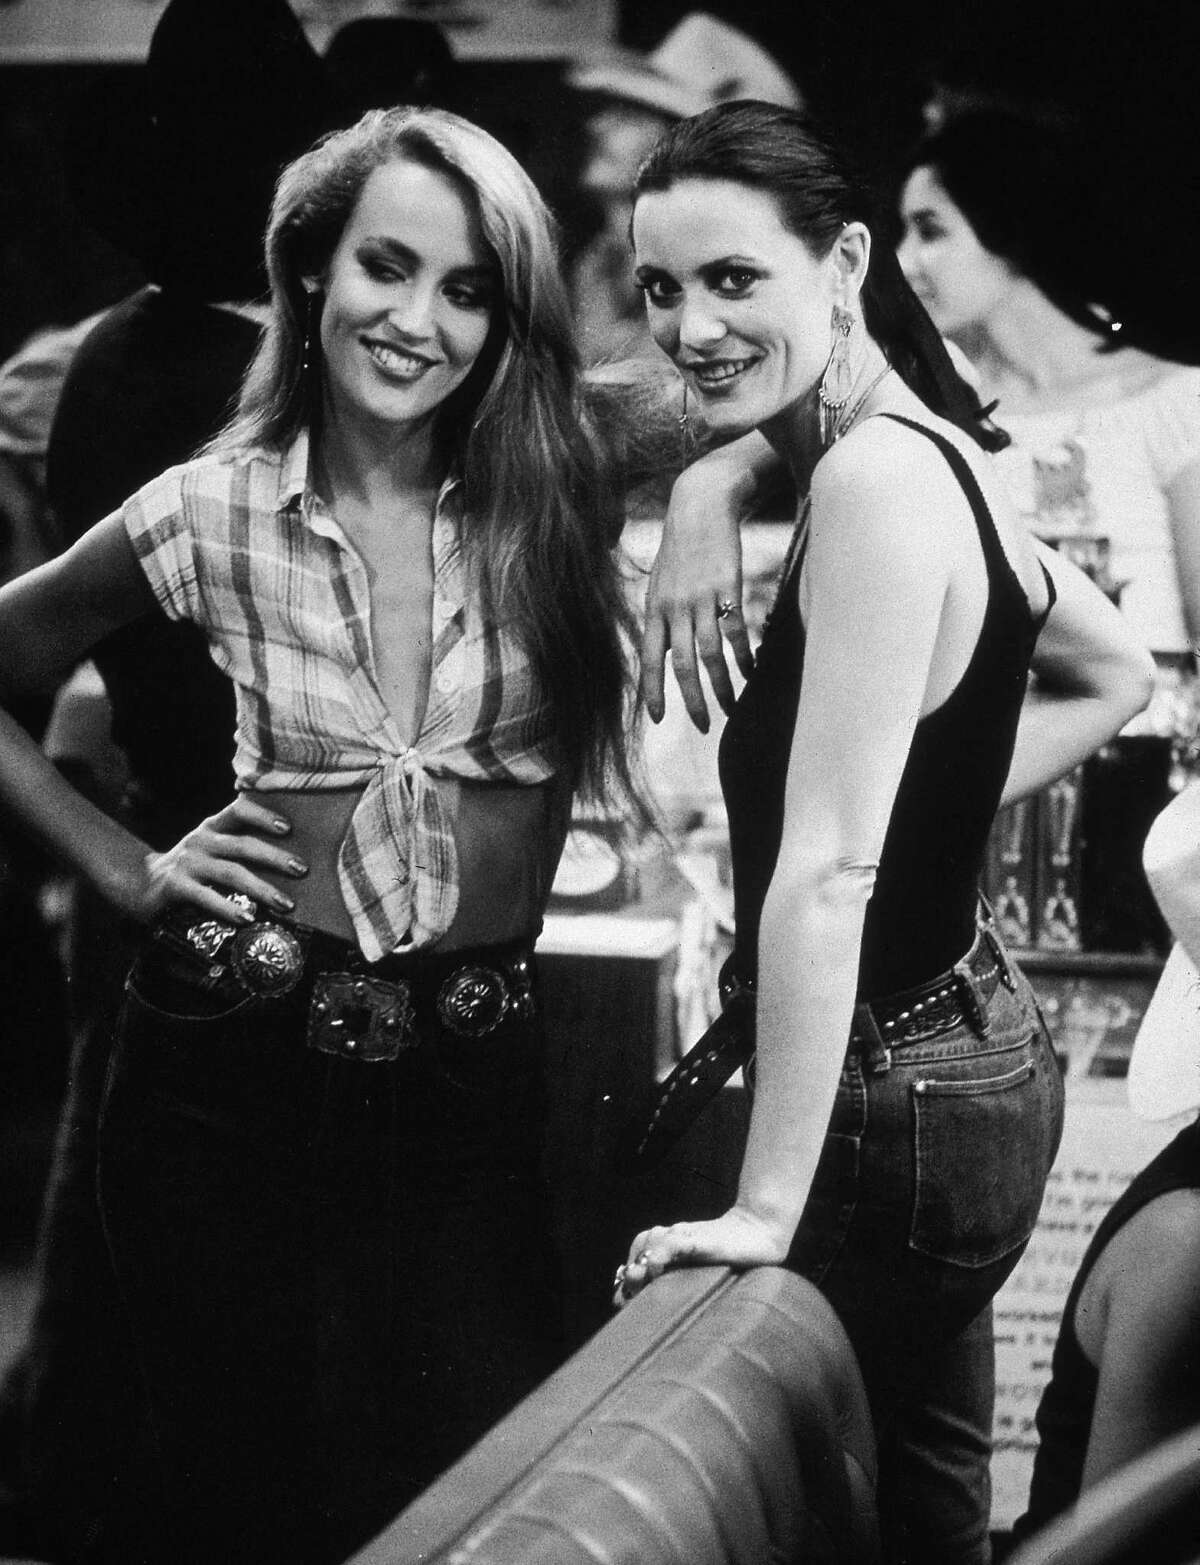 1980, American model and actor Jerry Hall and her sister, Cindy, at a party for director James Bridges's film 'Urban Cowboy' held at Gilley's, in Pasadena, Texas.